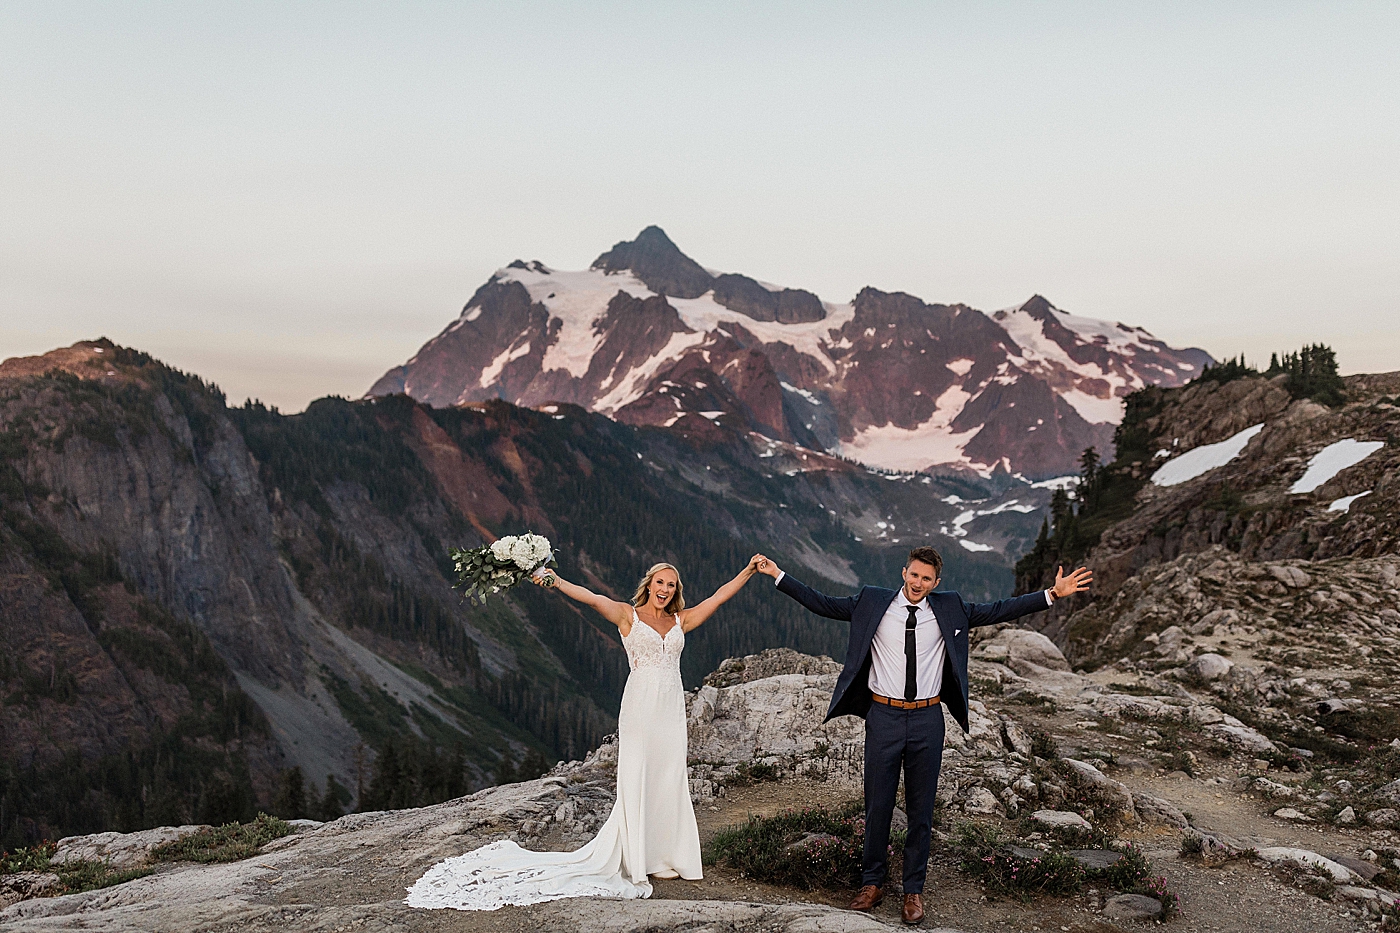 Bride and groom eloping at Artist Point. Photo by Megan Montalvo Photography.